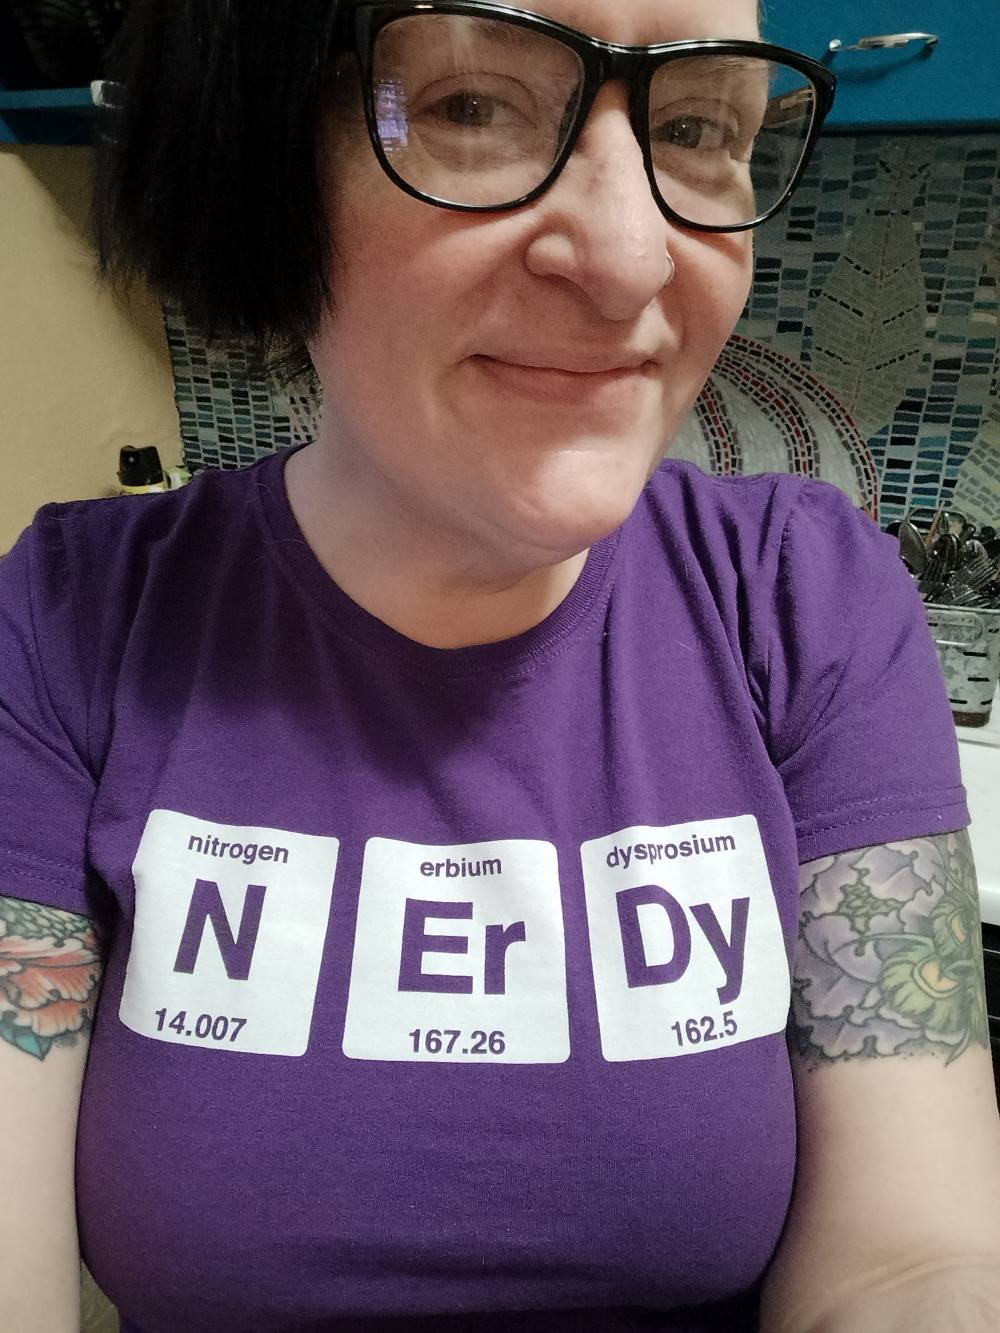 selfie of Amy wearing shirt of biological elements that spells out Nerdy